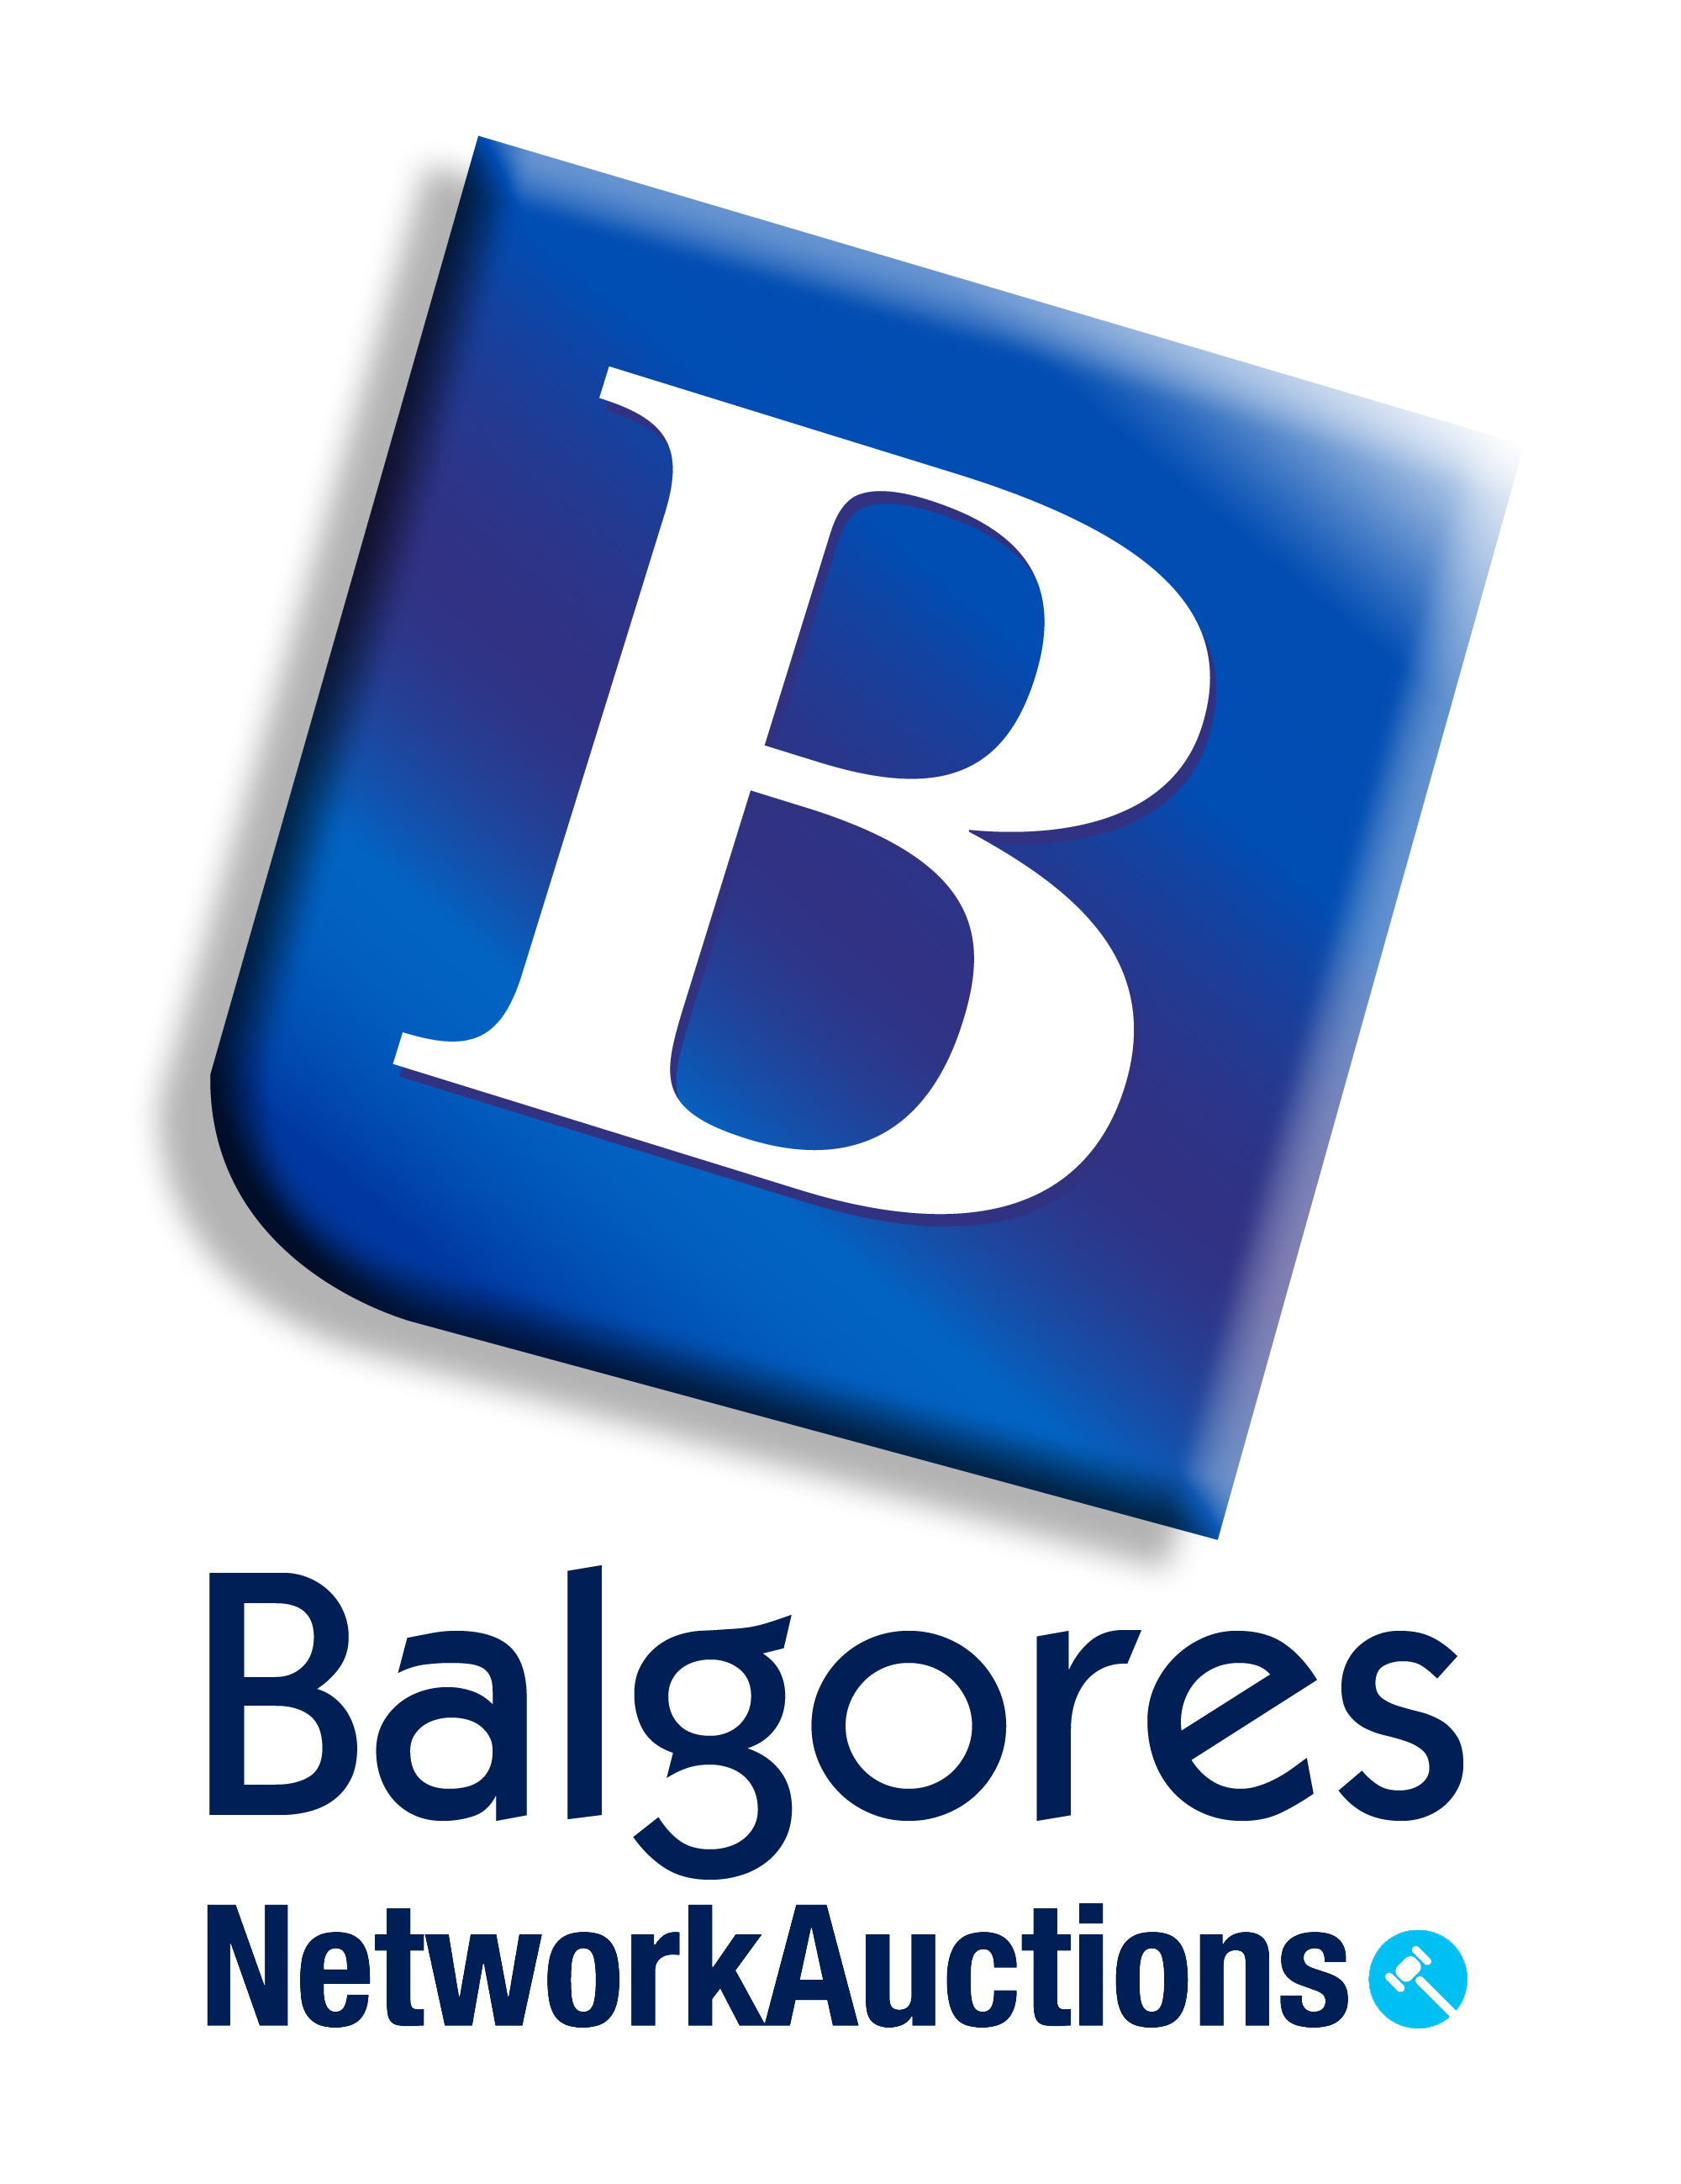 Please contact Balgores Network Auctions on 01245 492424.